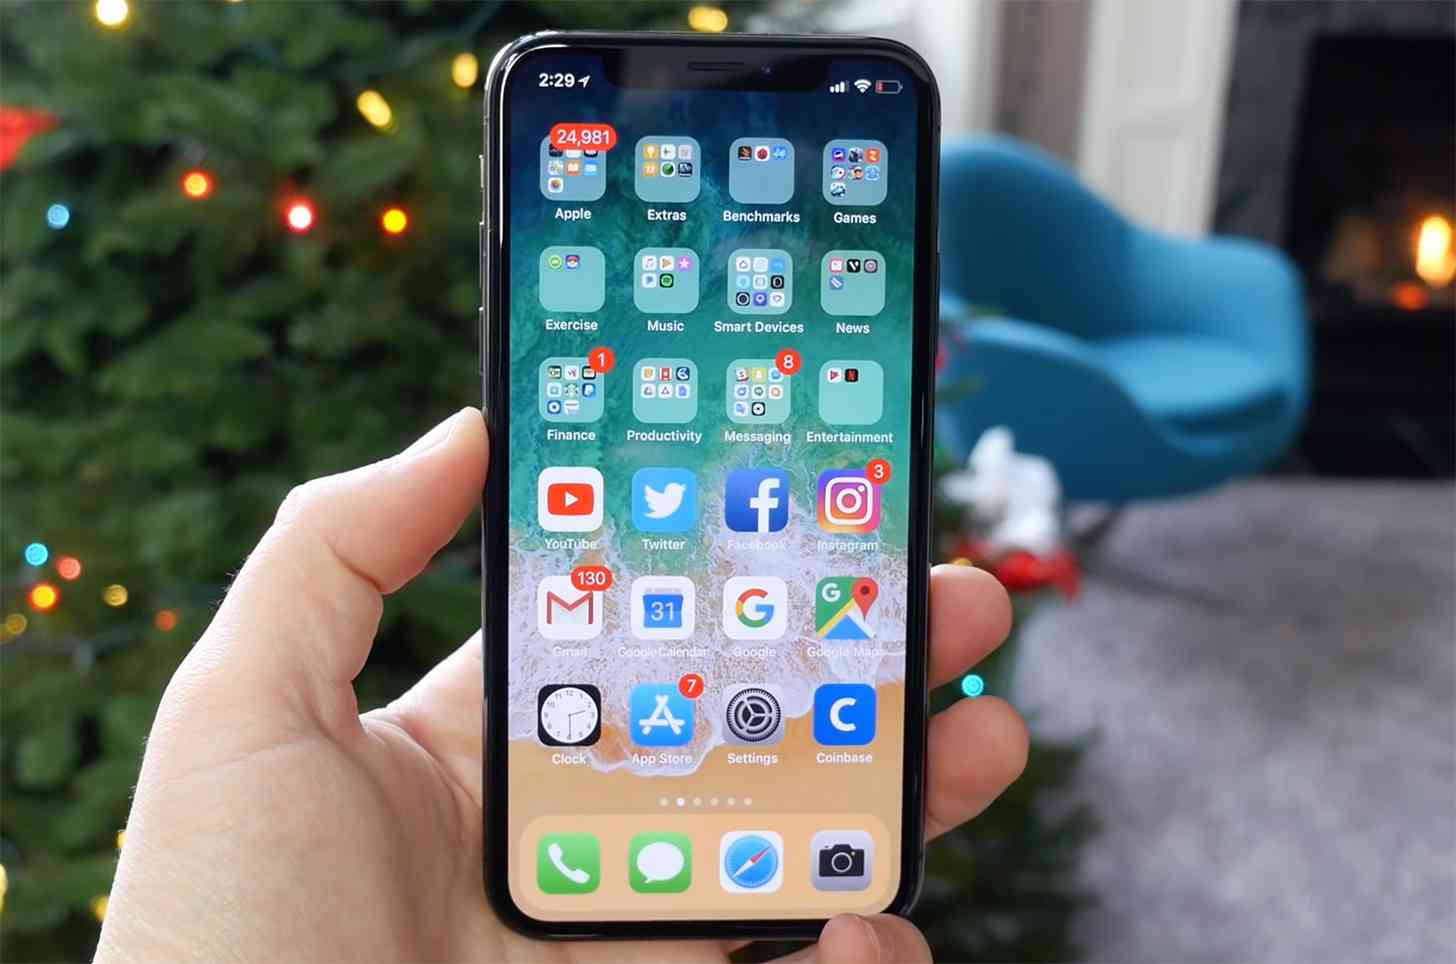 Apple iPhone X hands-on video